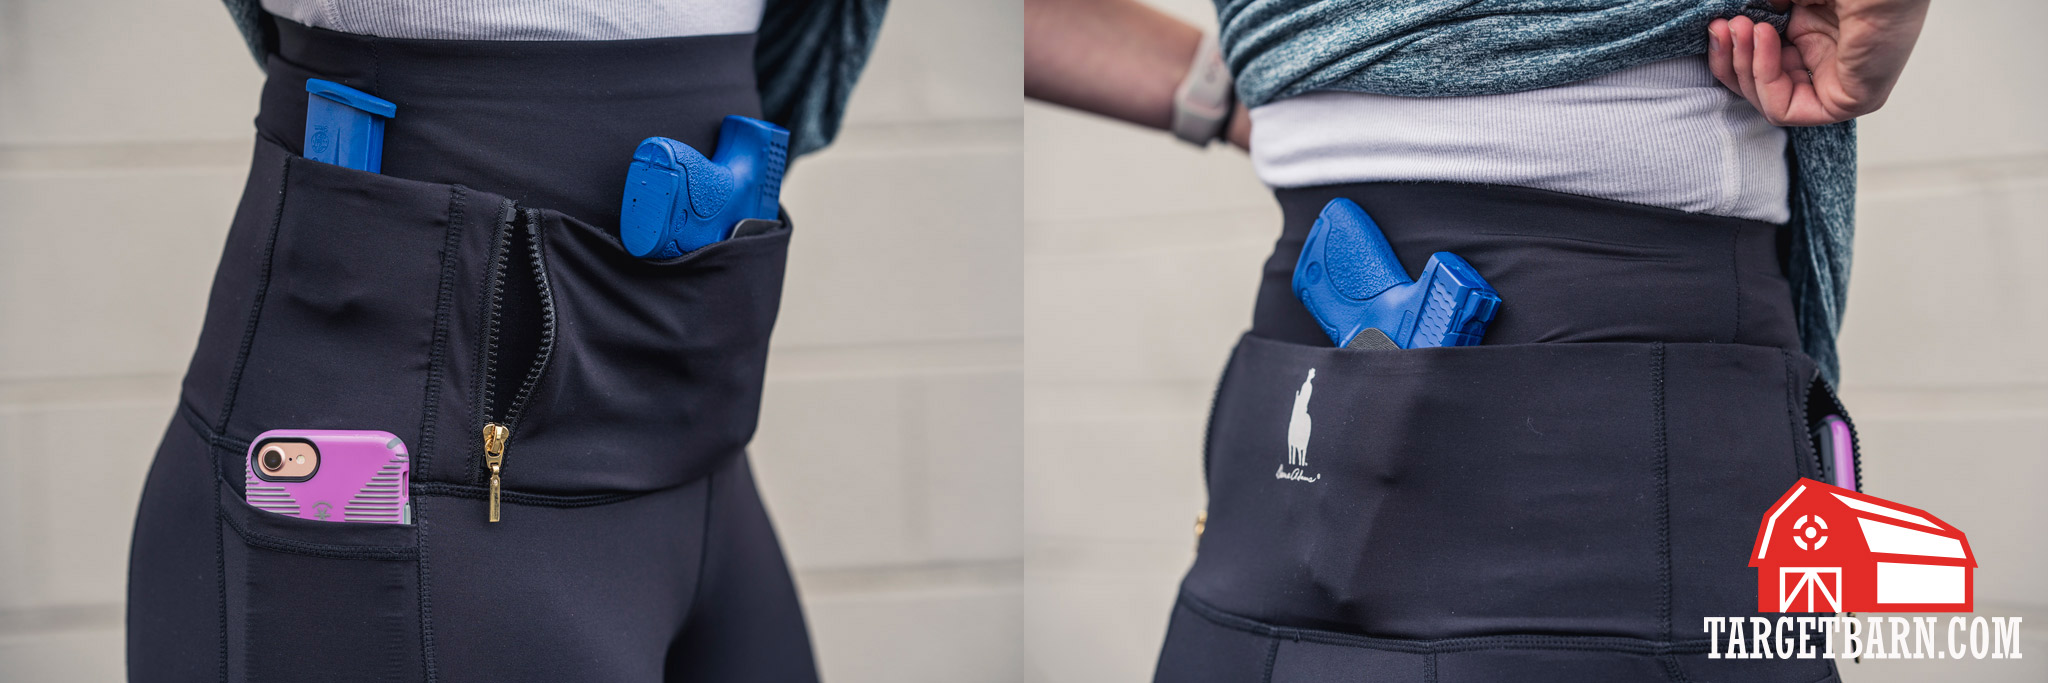 front and back view of Dene Adams Classic Concealed Carry Tactical Leggings with blue guns and magazine holstered